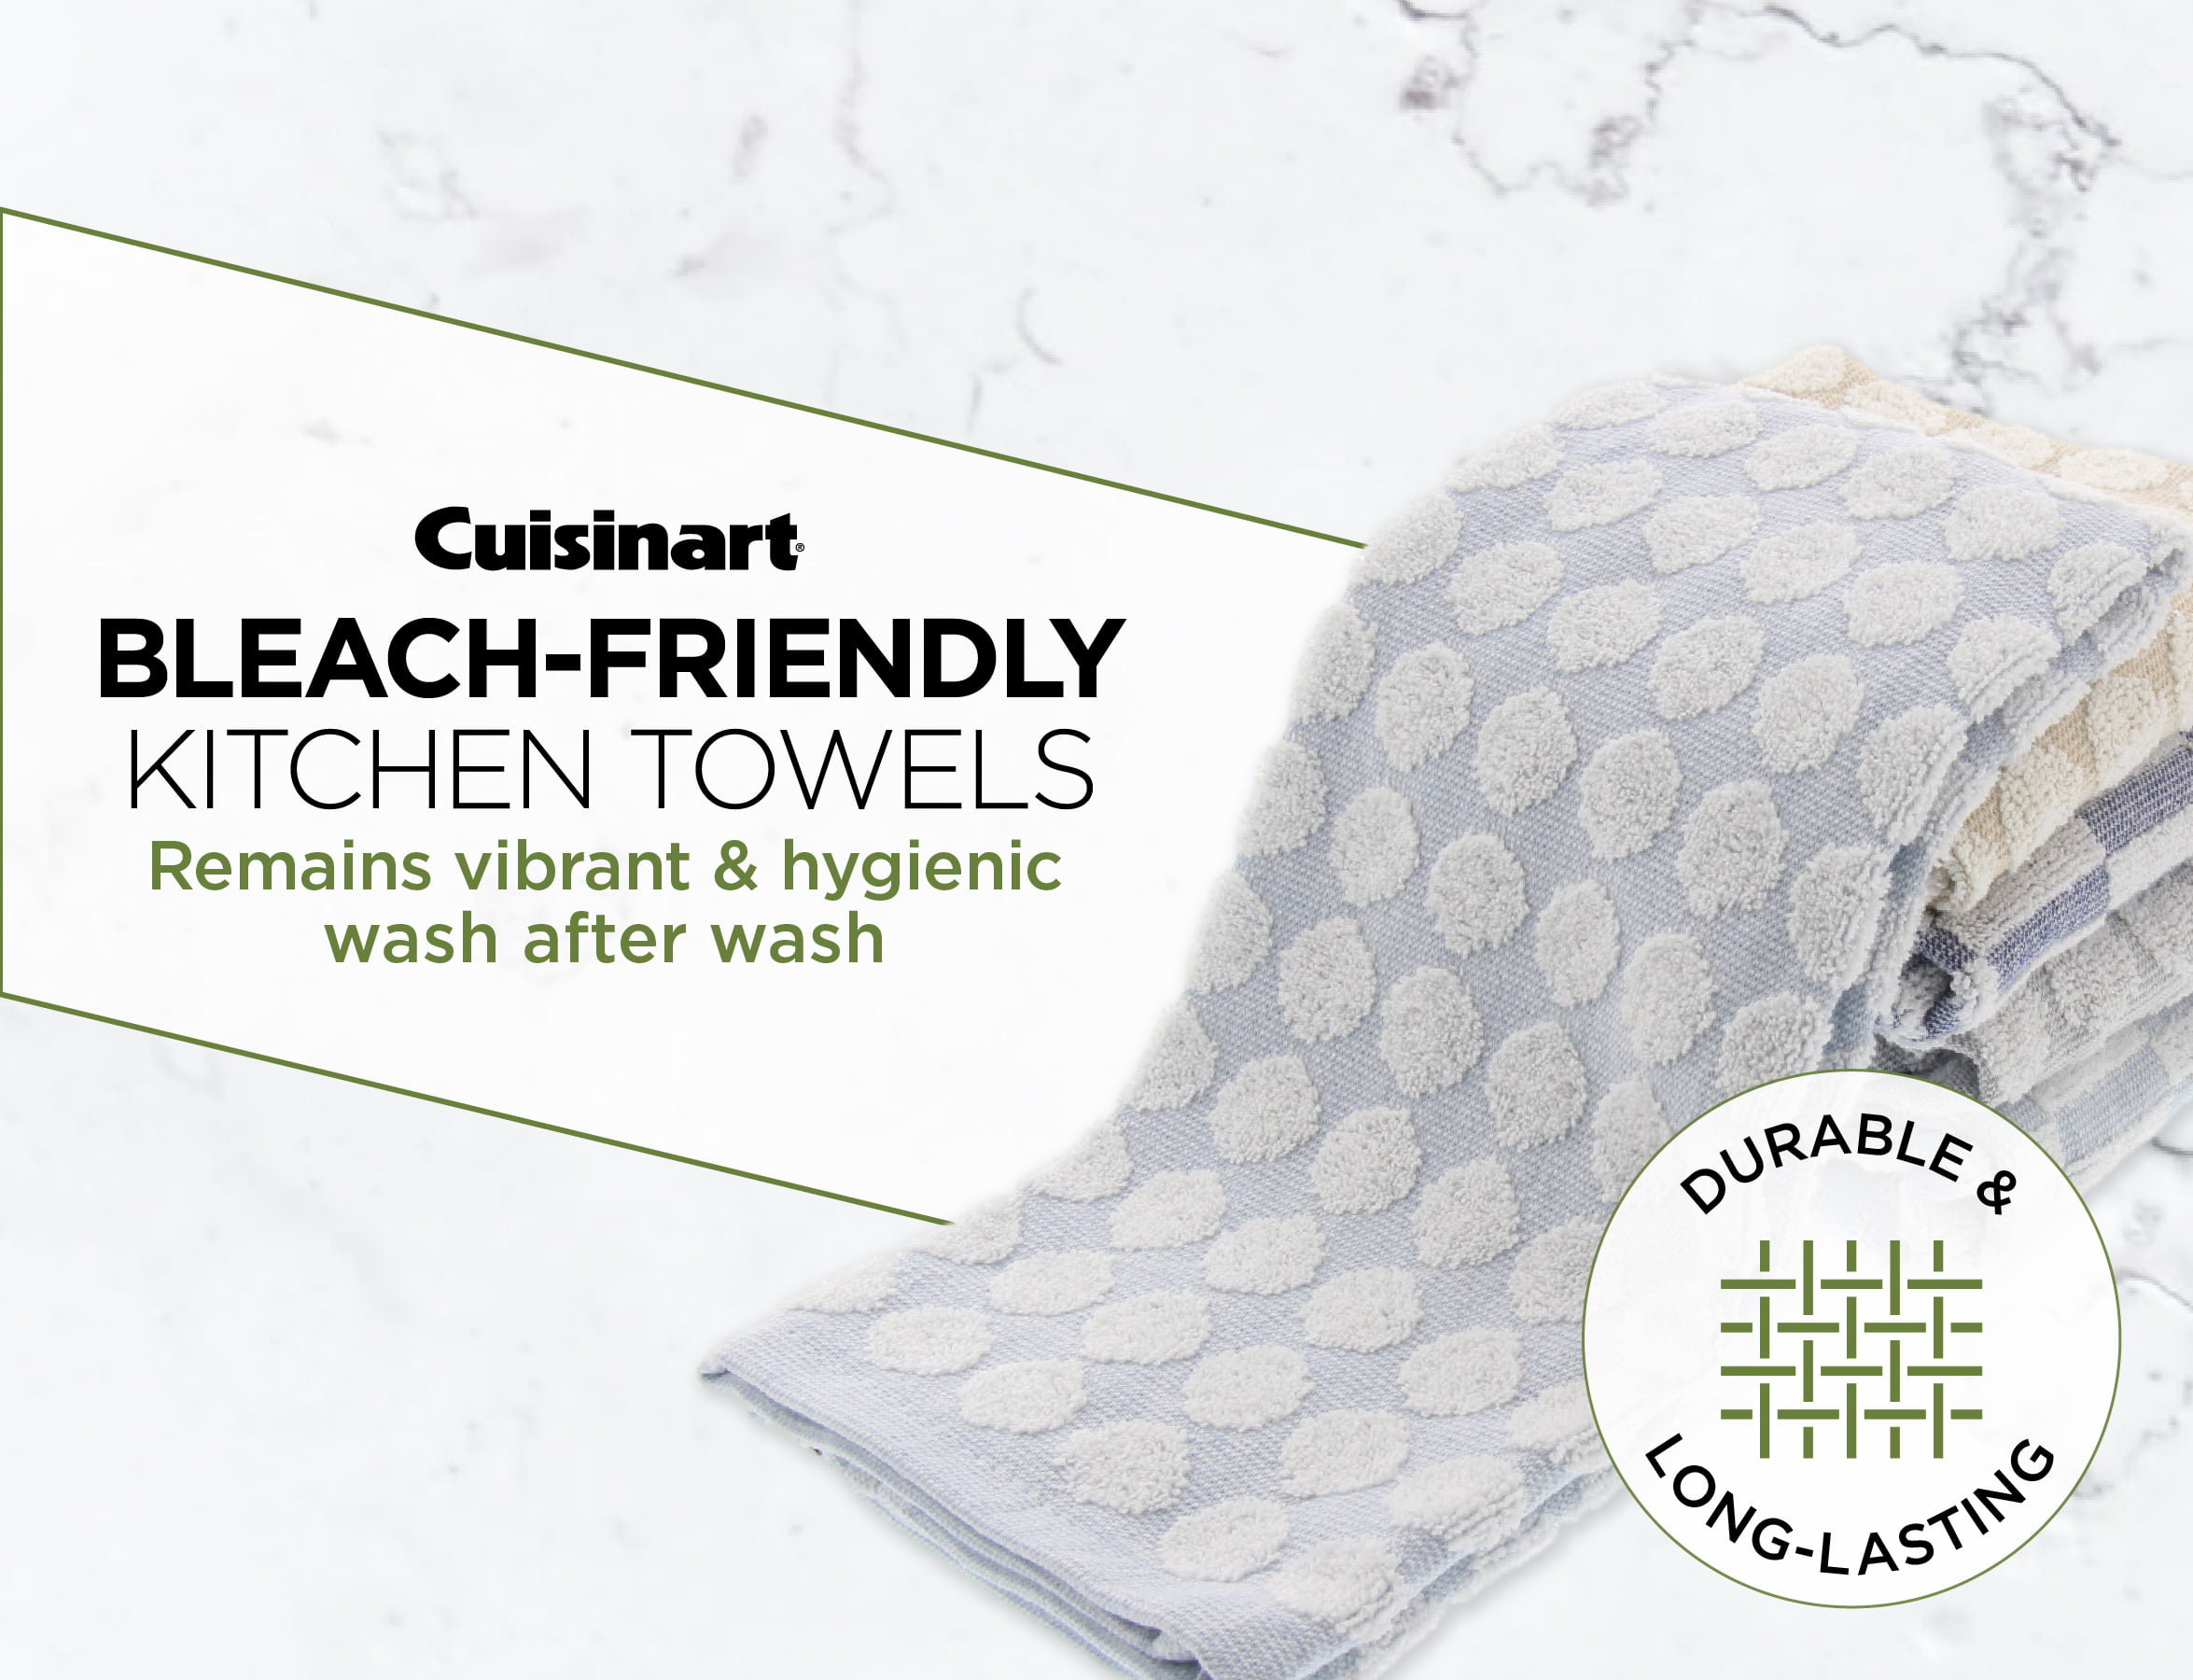 Cuisinart Bamboo Dish Towel Set-Kitchen and Hand Towels for Drying Dishes/Hands - Absorbent, Soft and Anti-Microbial-Premium Bamboo/Cotton Blend, 2